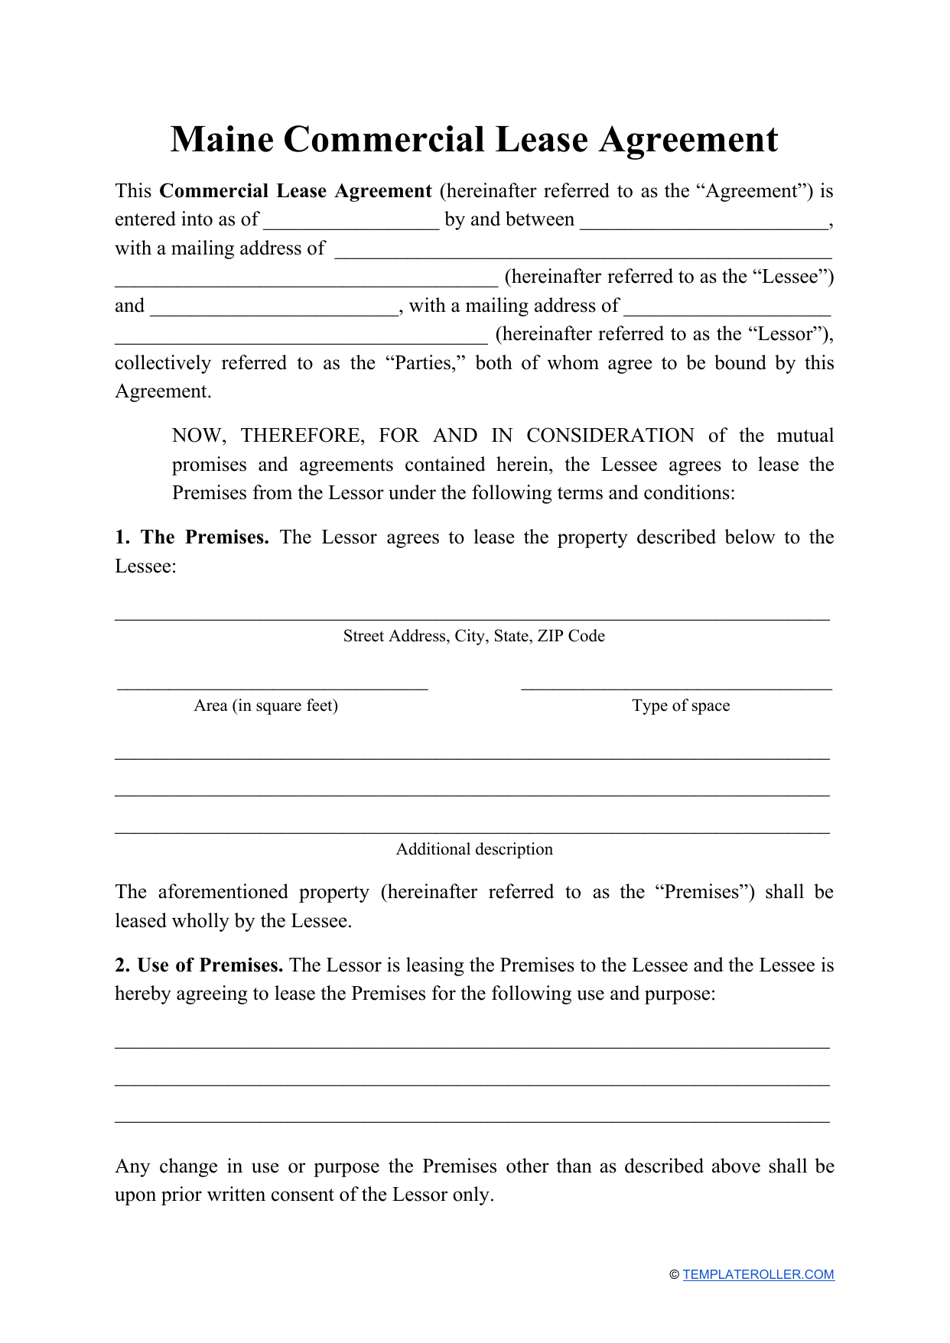 Commercial Lease Agreement Template - Maine, Page 1